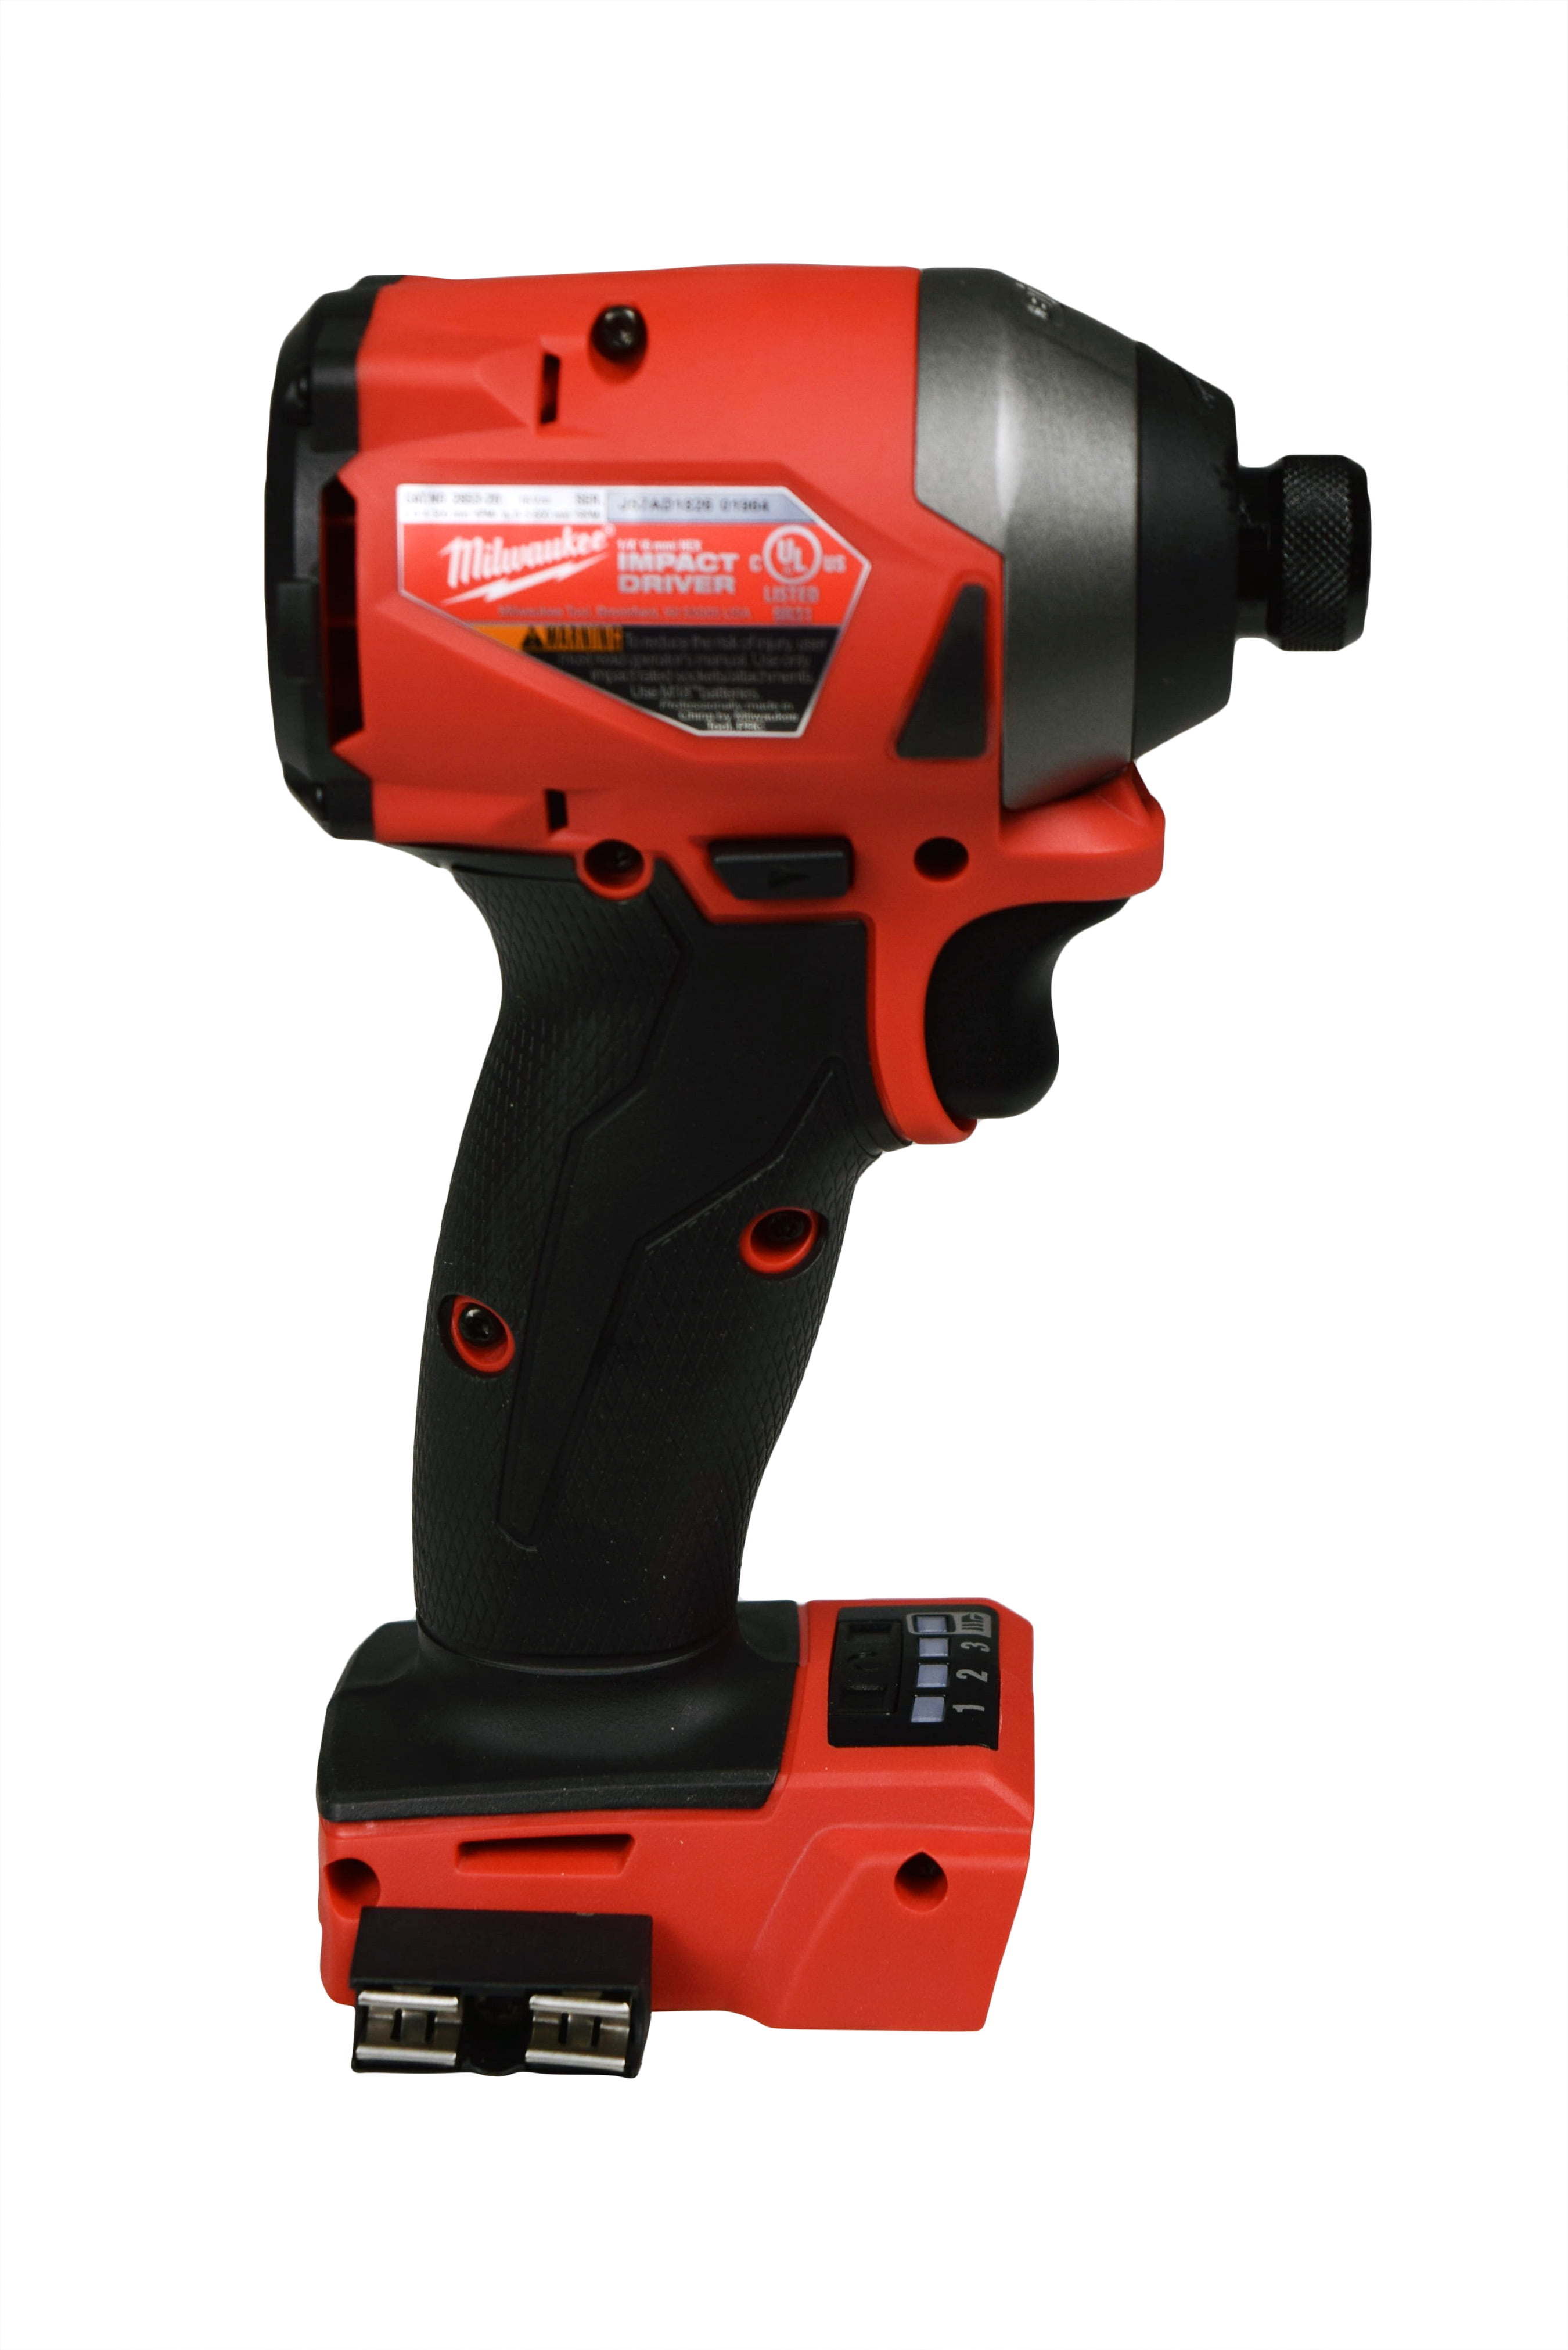 Milwaukee M18 Fuel Impact Driver: 4th Generation Technology - PTR